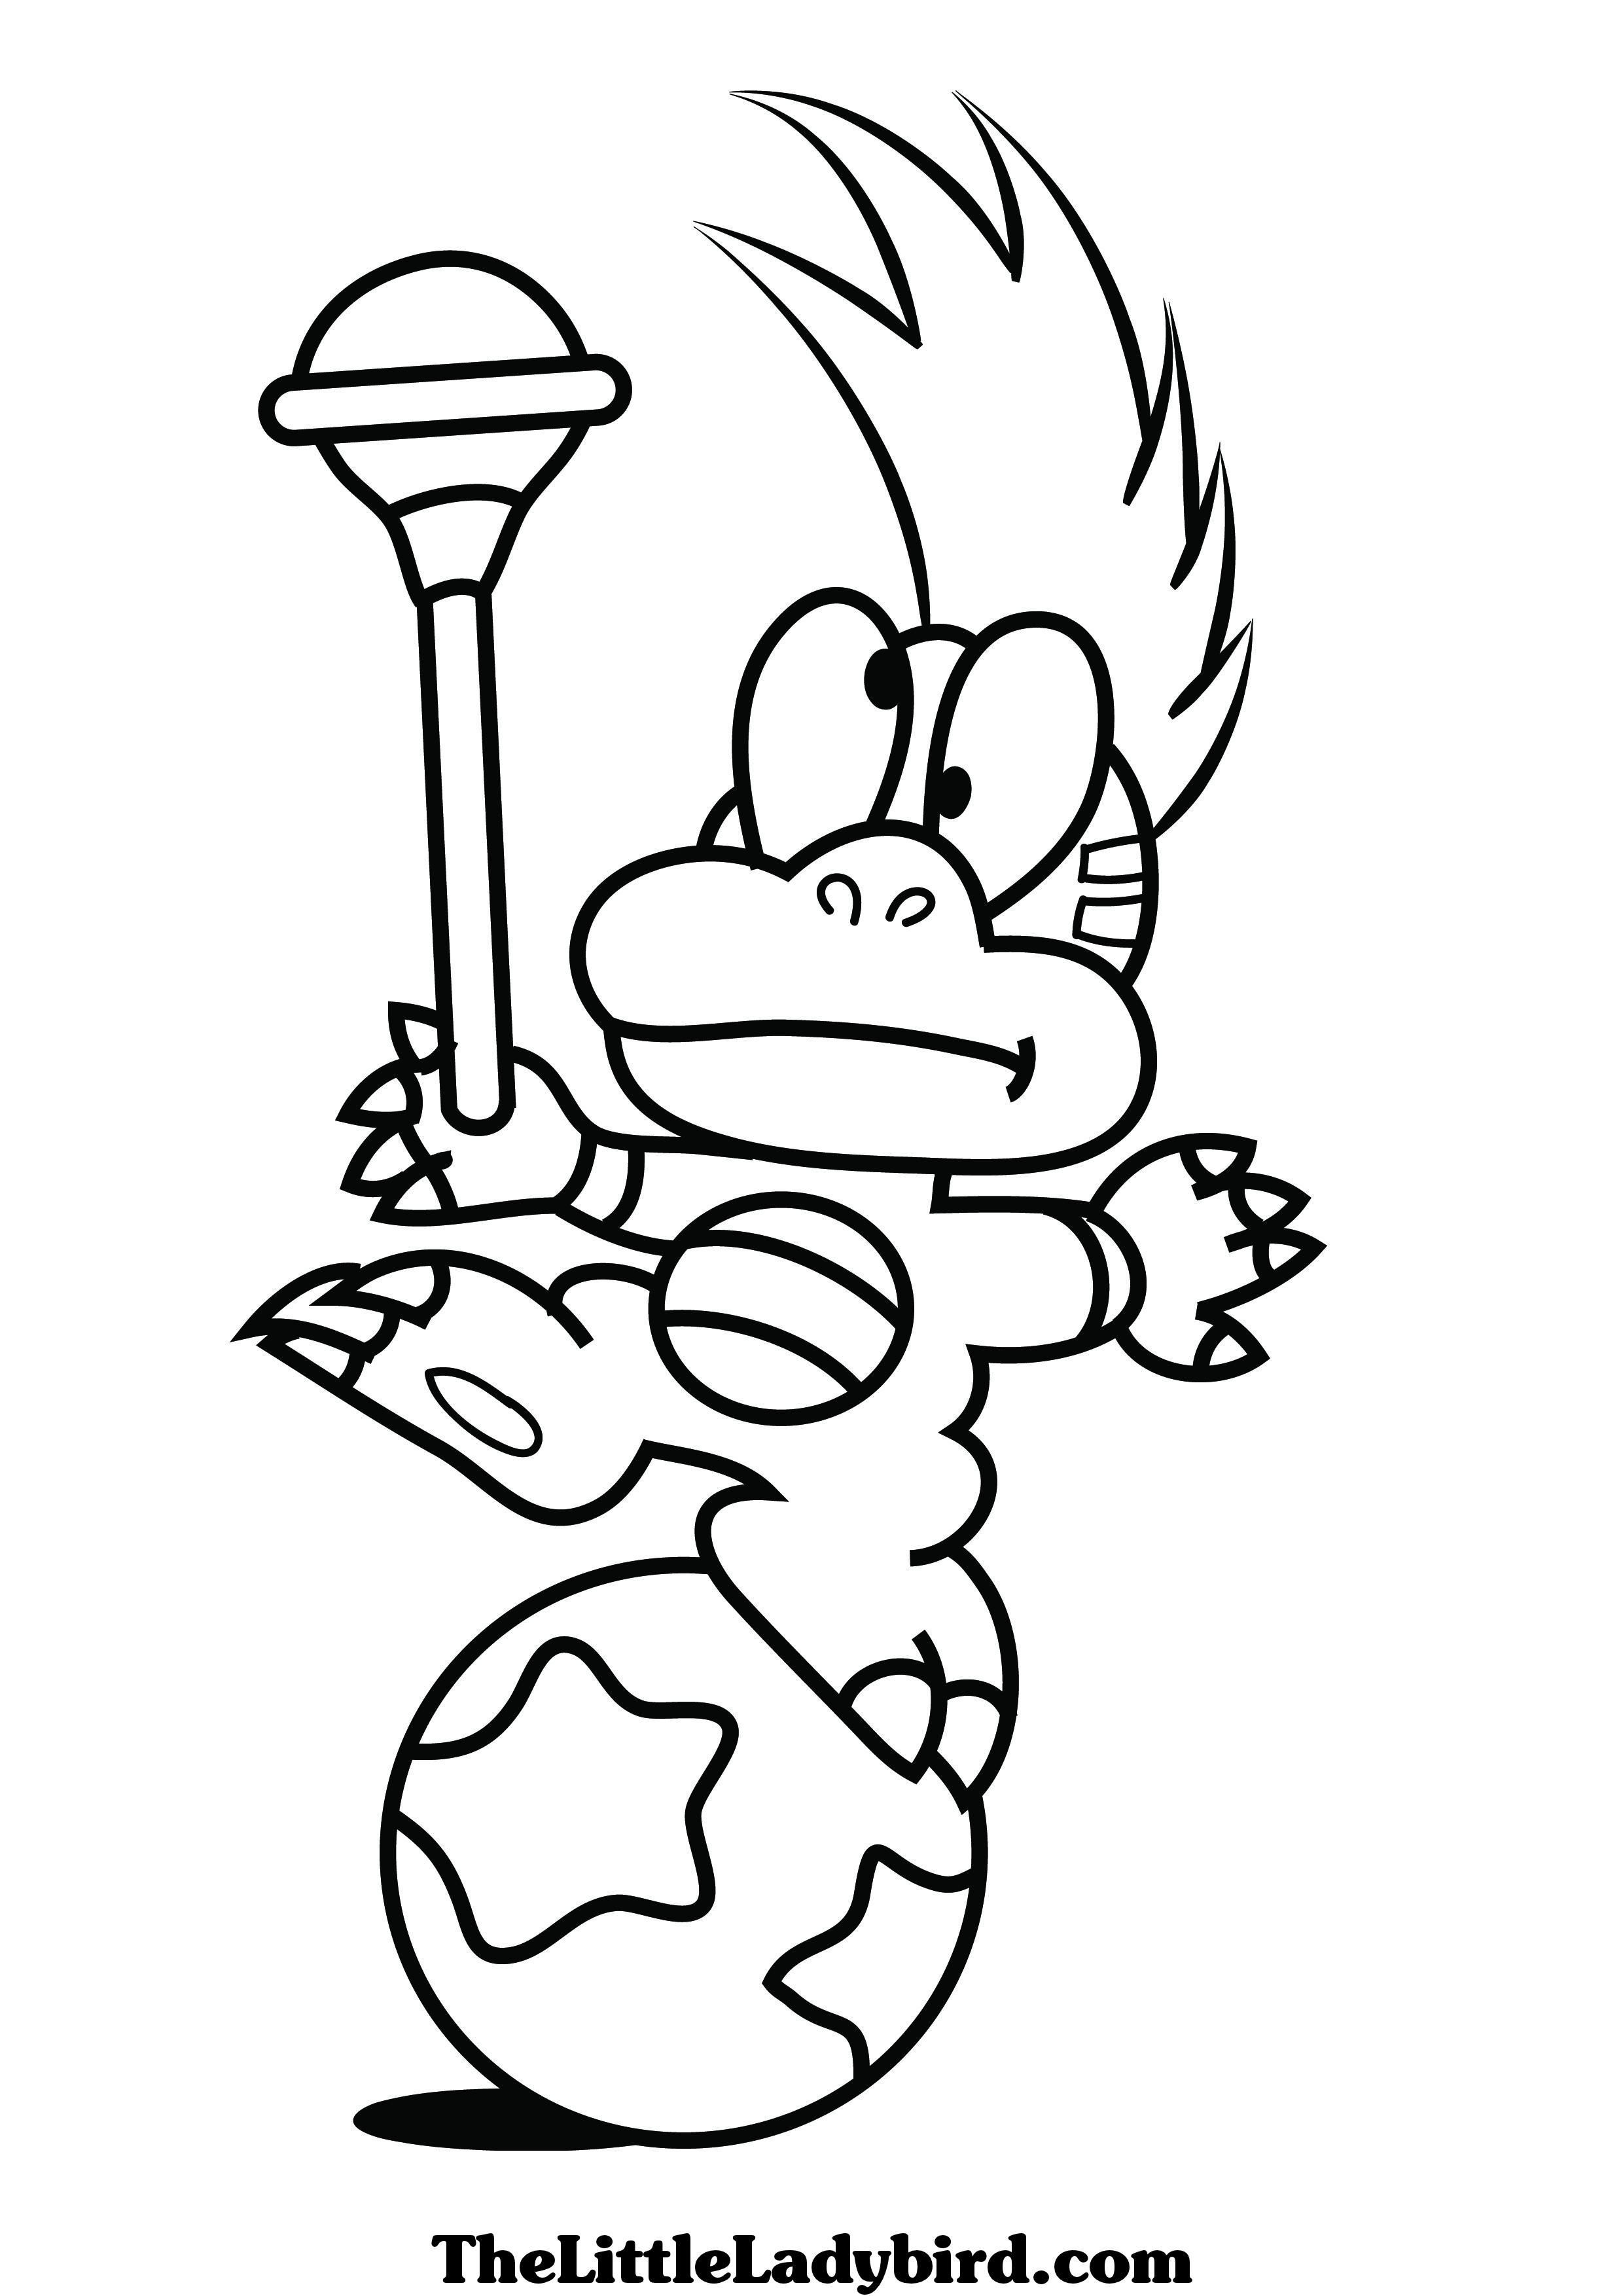 Download or print this amazing coloring page: Larry Koopaling Coloring Page (...